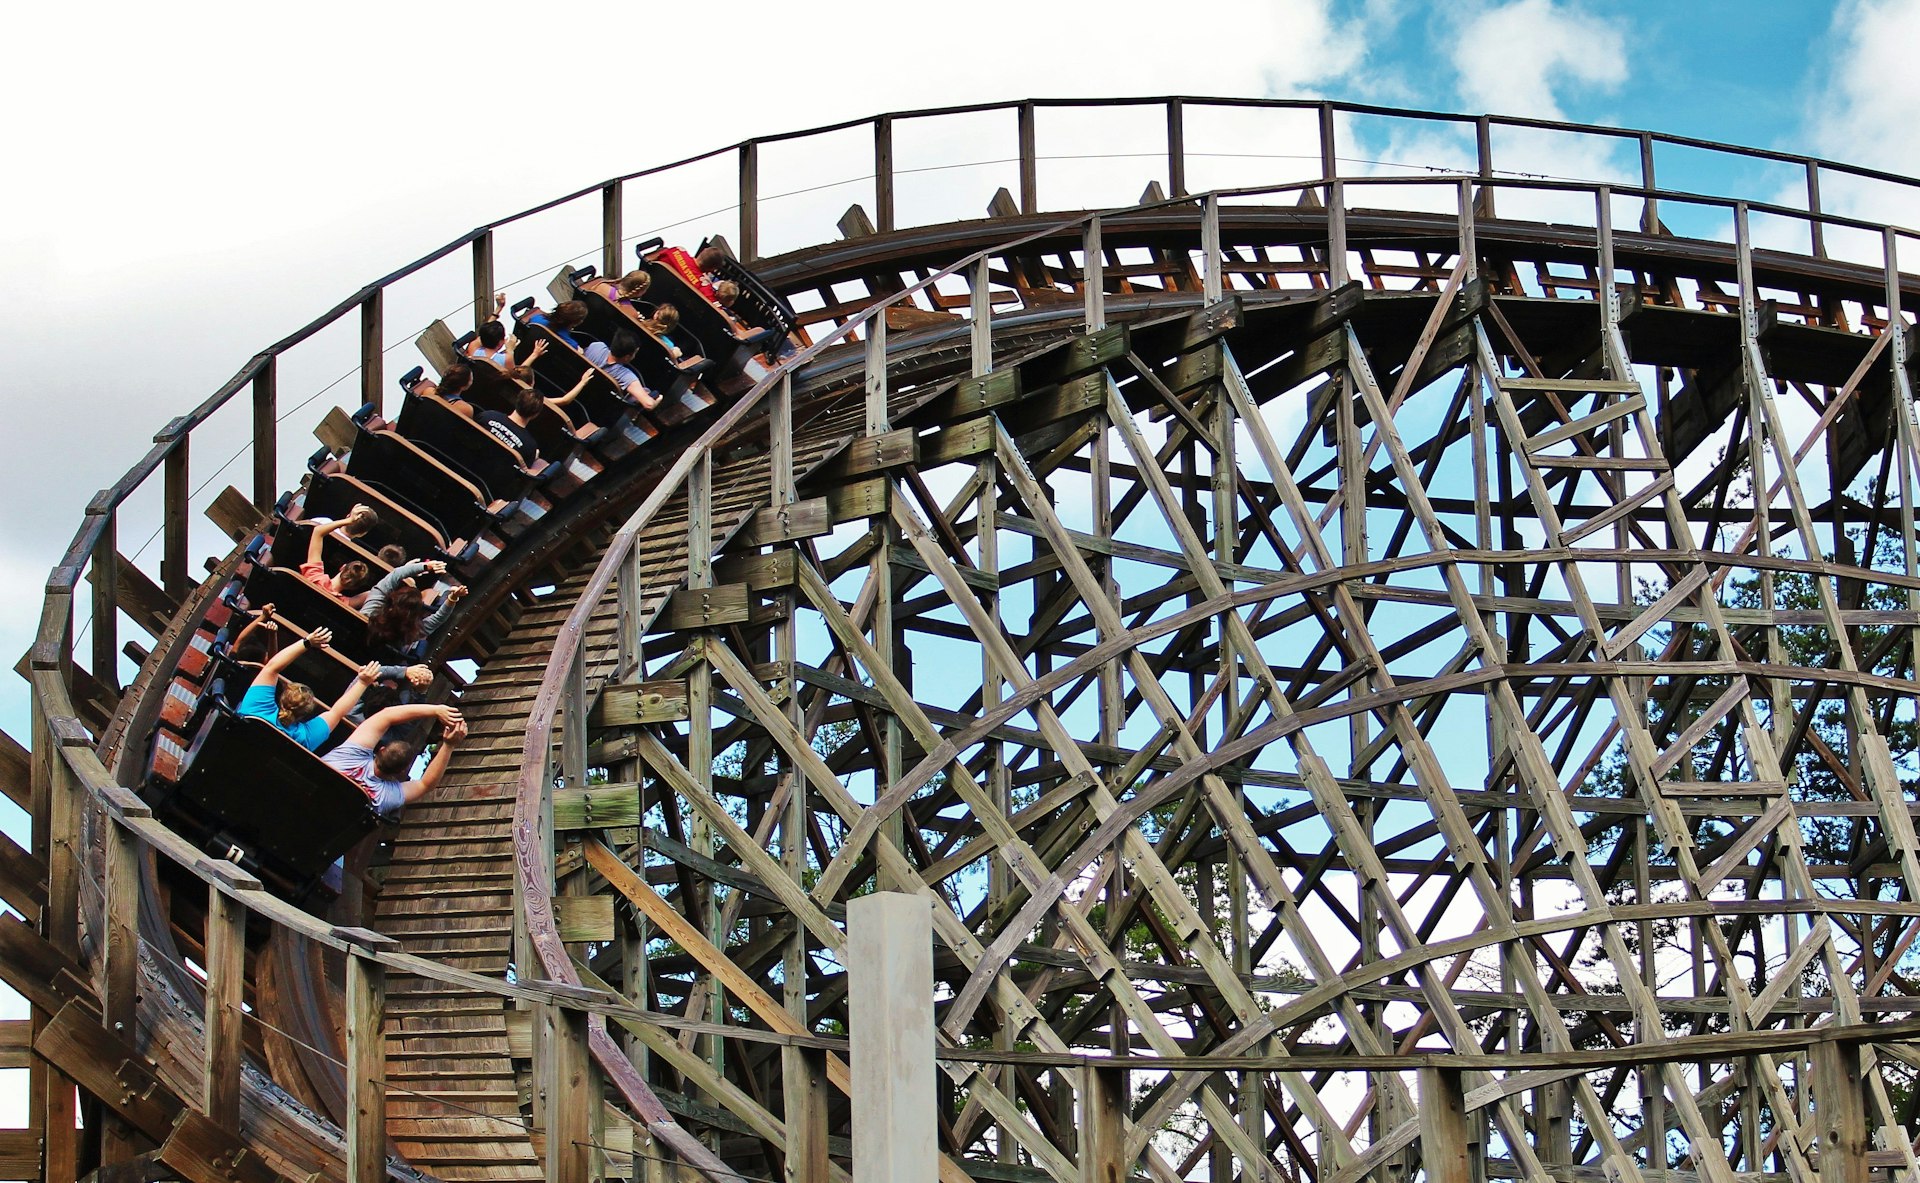 People on a wooden rollercoaster ride in Dollywood.